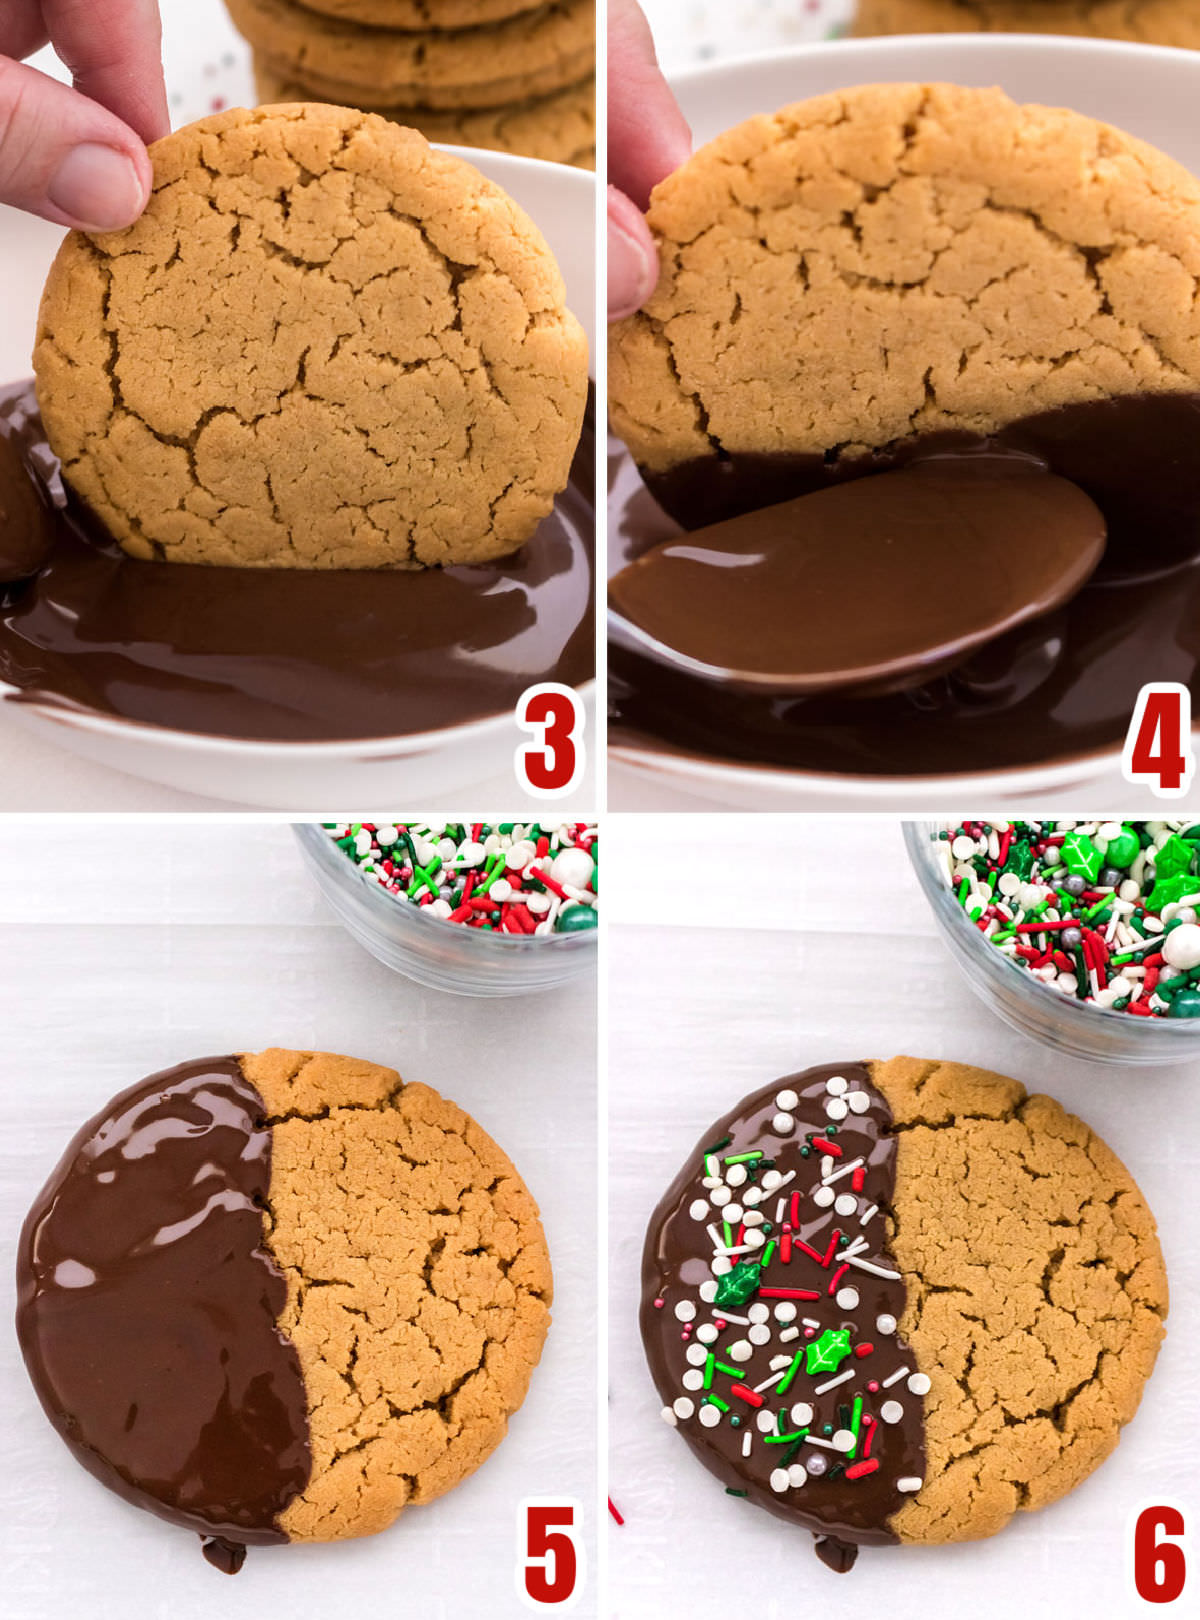 Collage image showing how to dip the Peanut Butter Cookie into melted chocolate and cover with sprinkles.